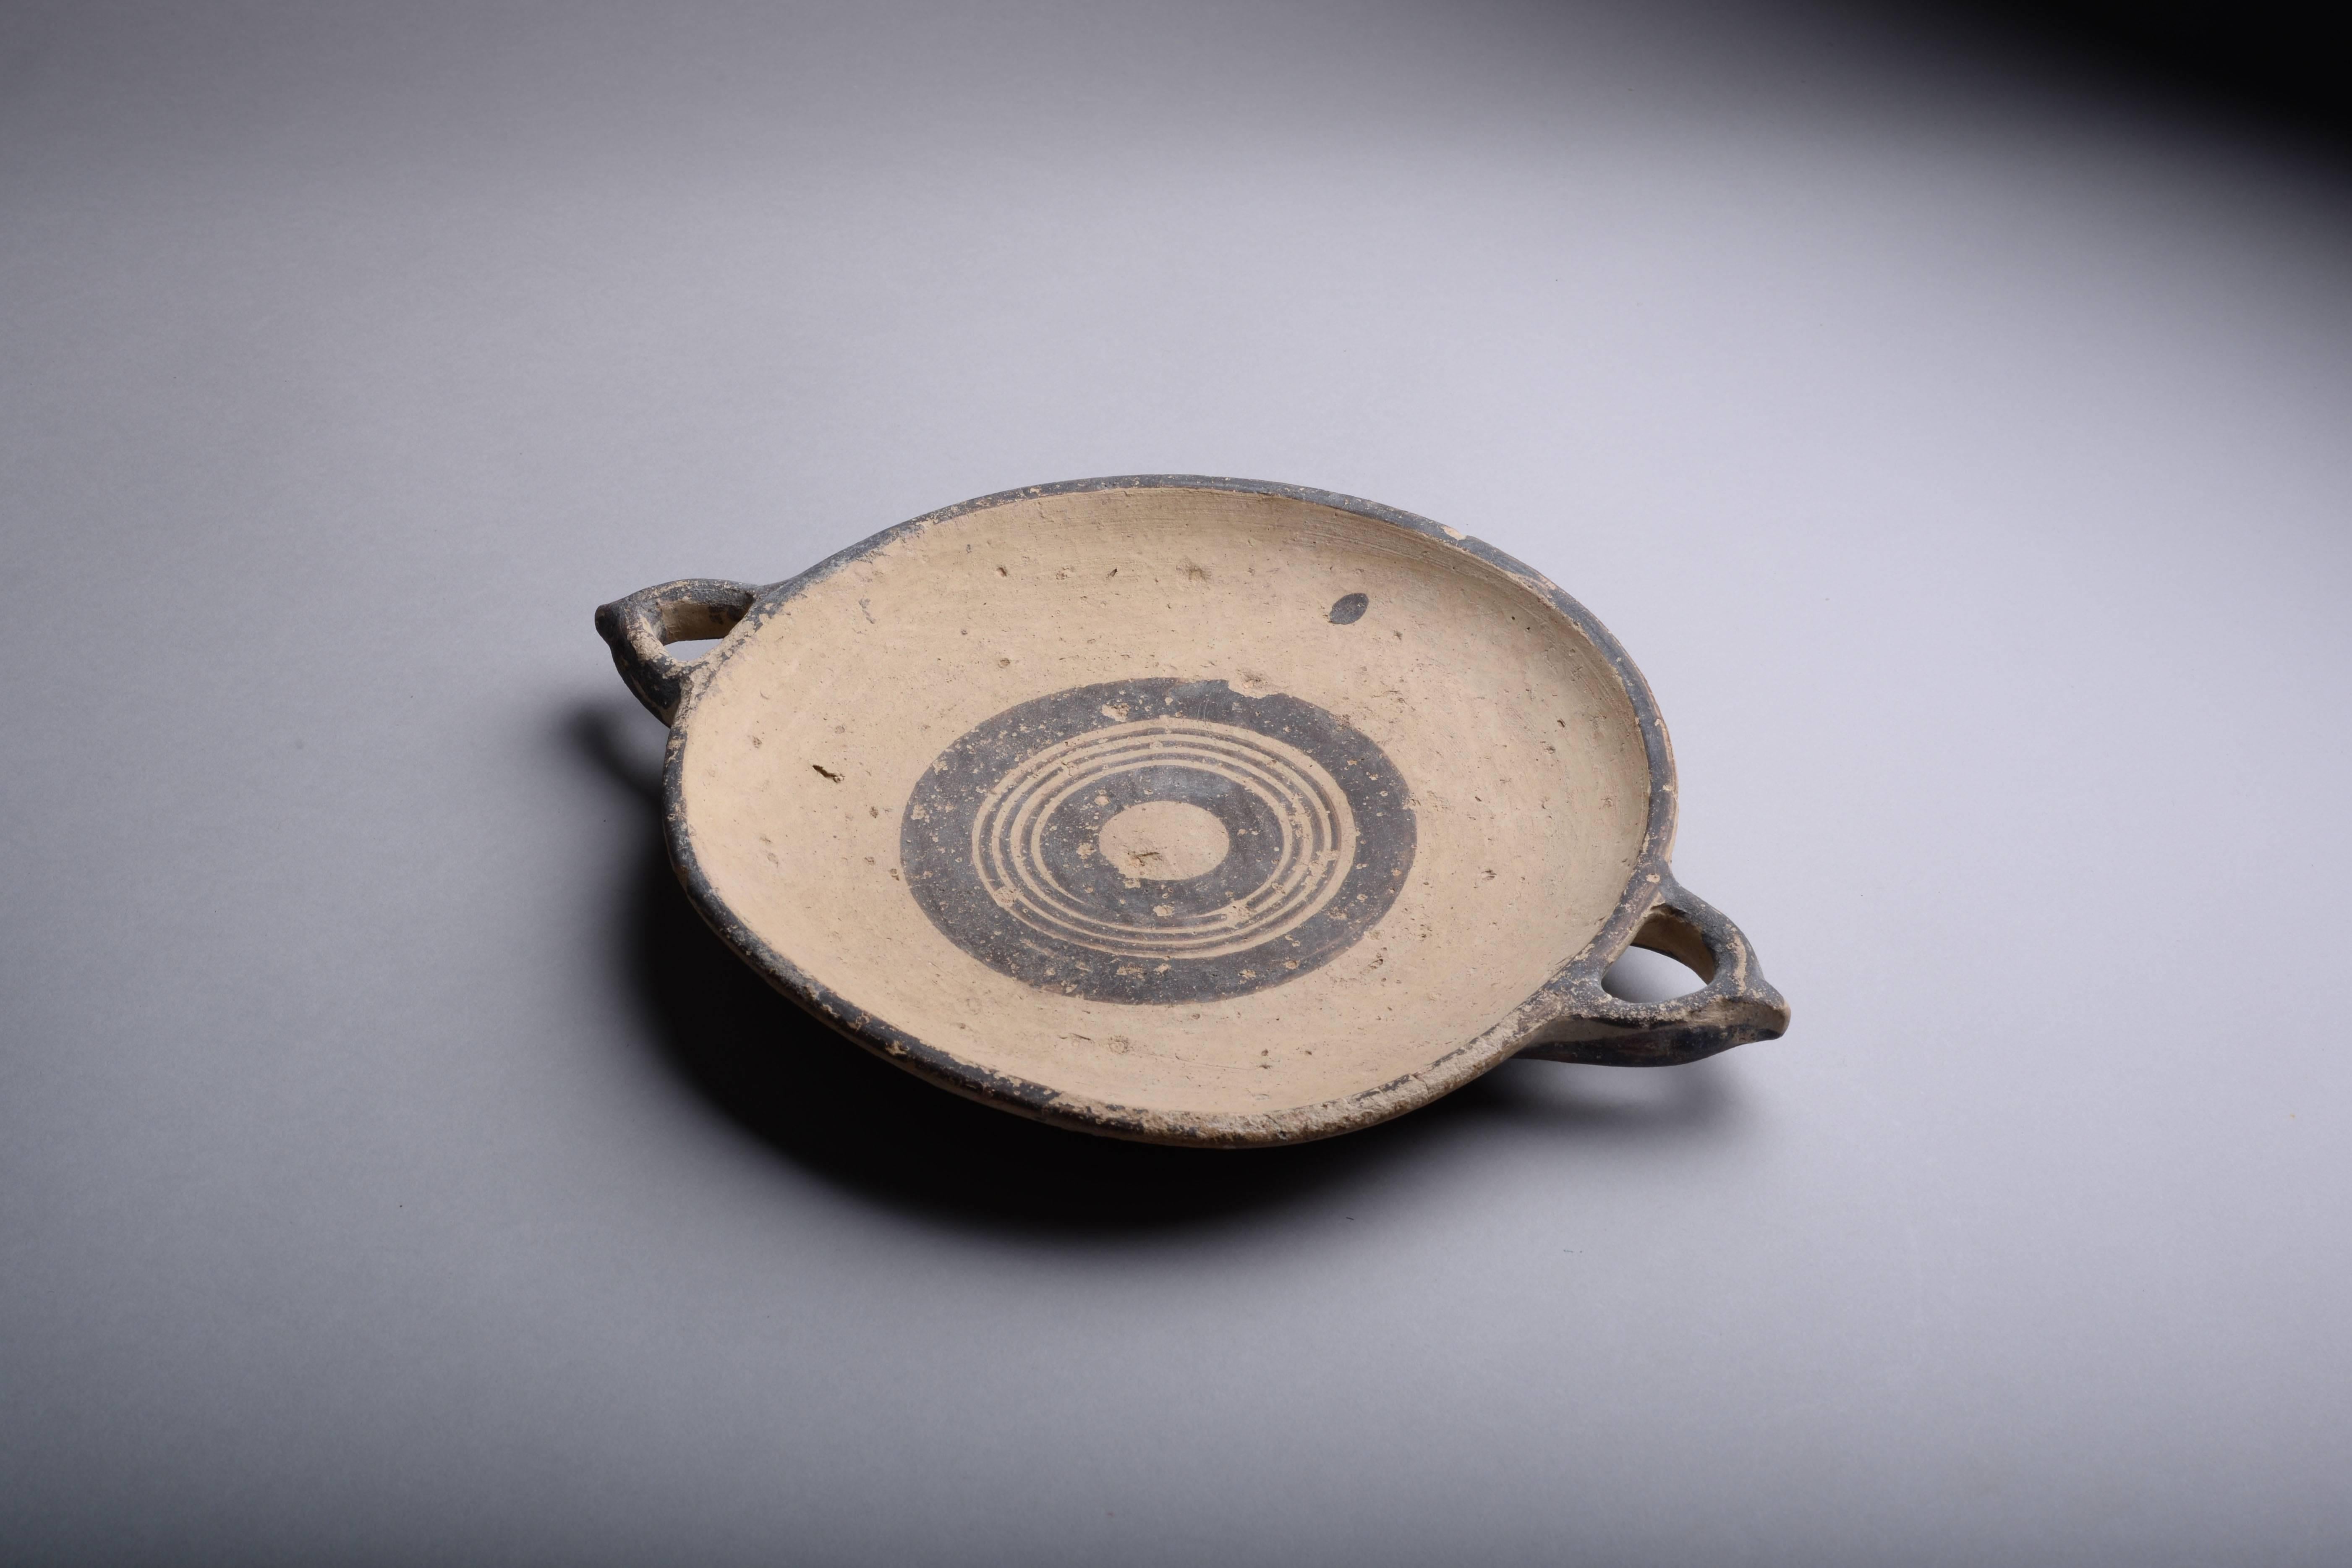 An exceptionally rare Cypro-Geometric plate, decorated profusely with a hunting scene, dating to circa 1050-600 BC.

The plate has shallow sides and ring base. There are two opposed horizontal loop handles which have simple nipples at their